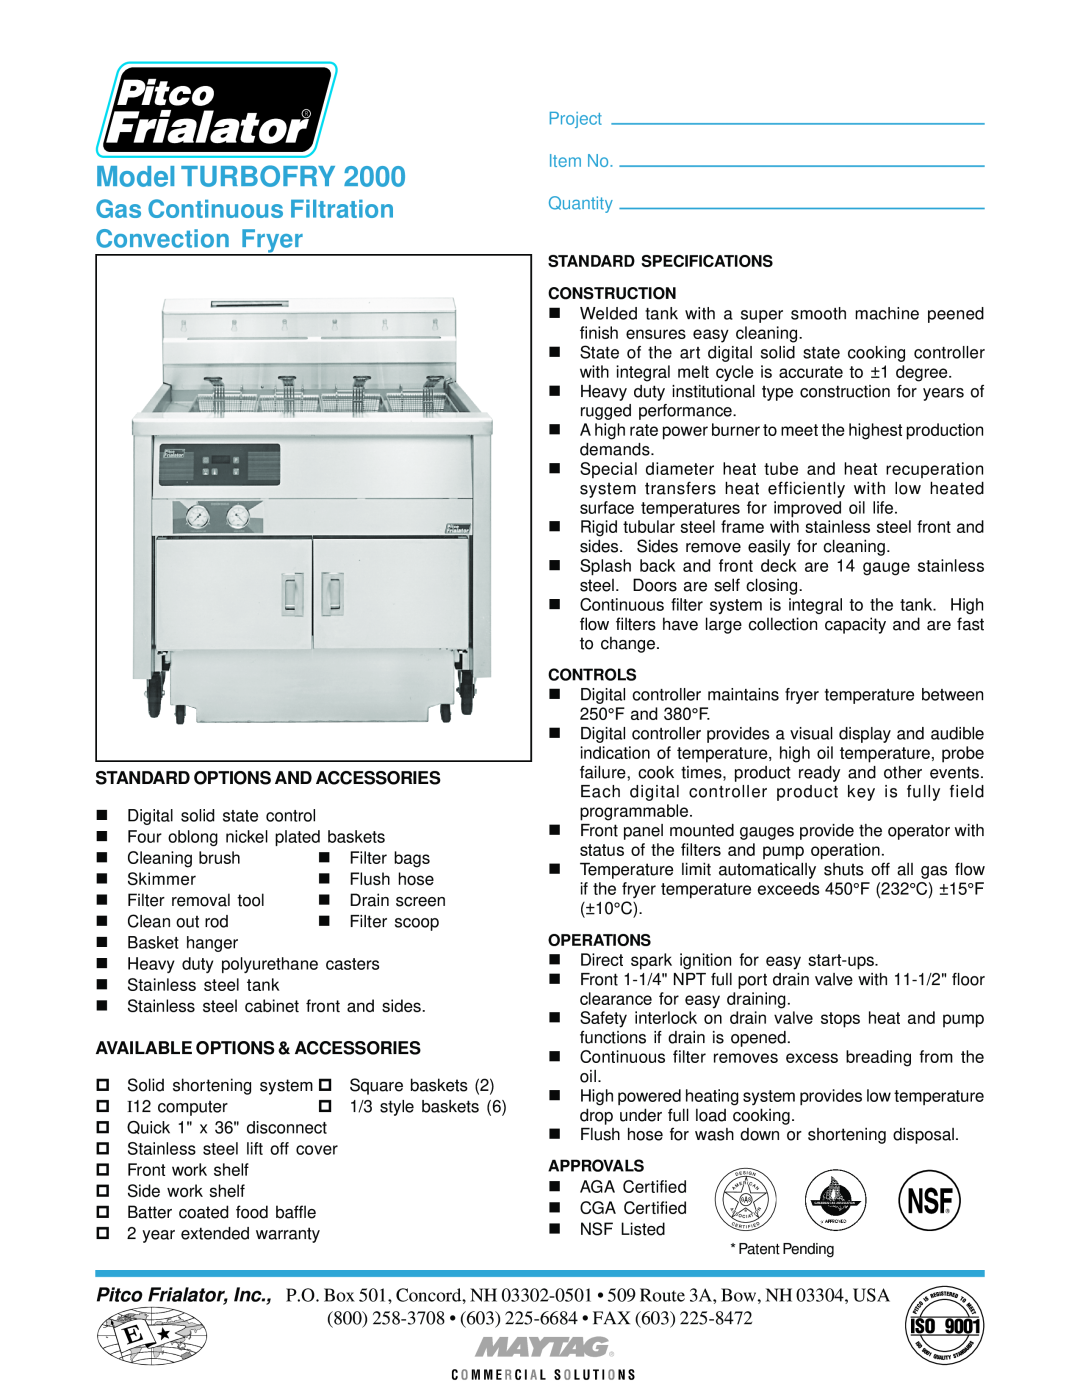 Pitco Frialator 2000 warranty Model TURBOFRY, Gas Continuous Filtration Convection Fryer, Standard Options And Accessories 